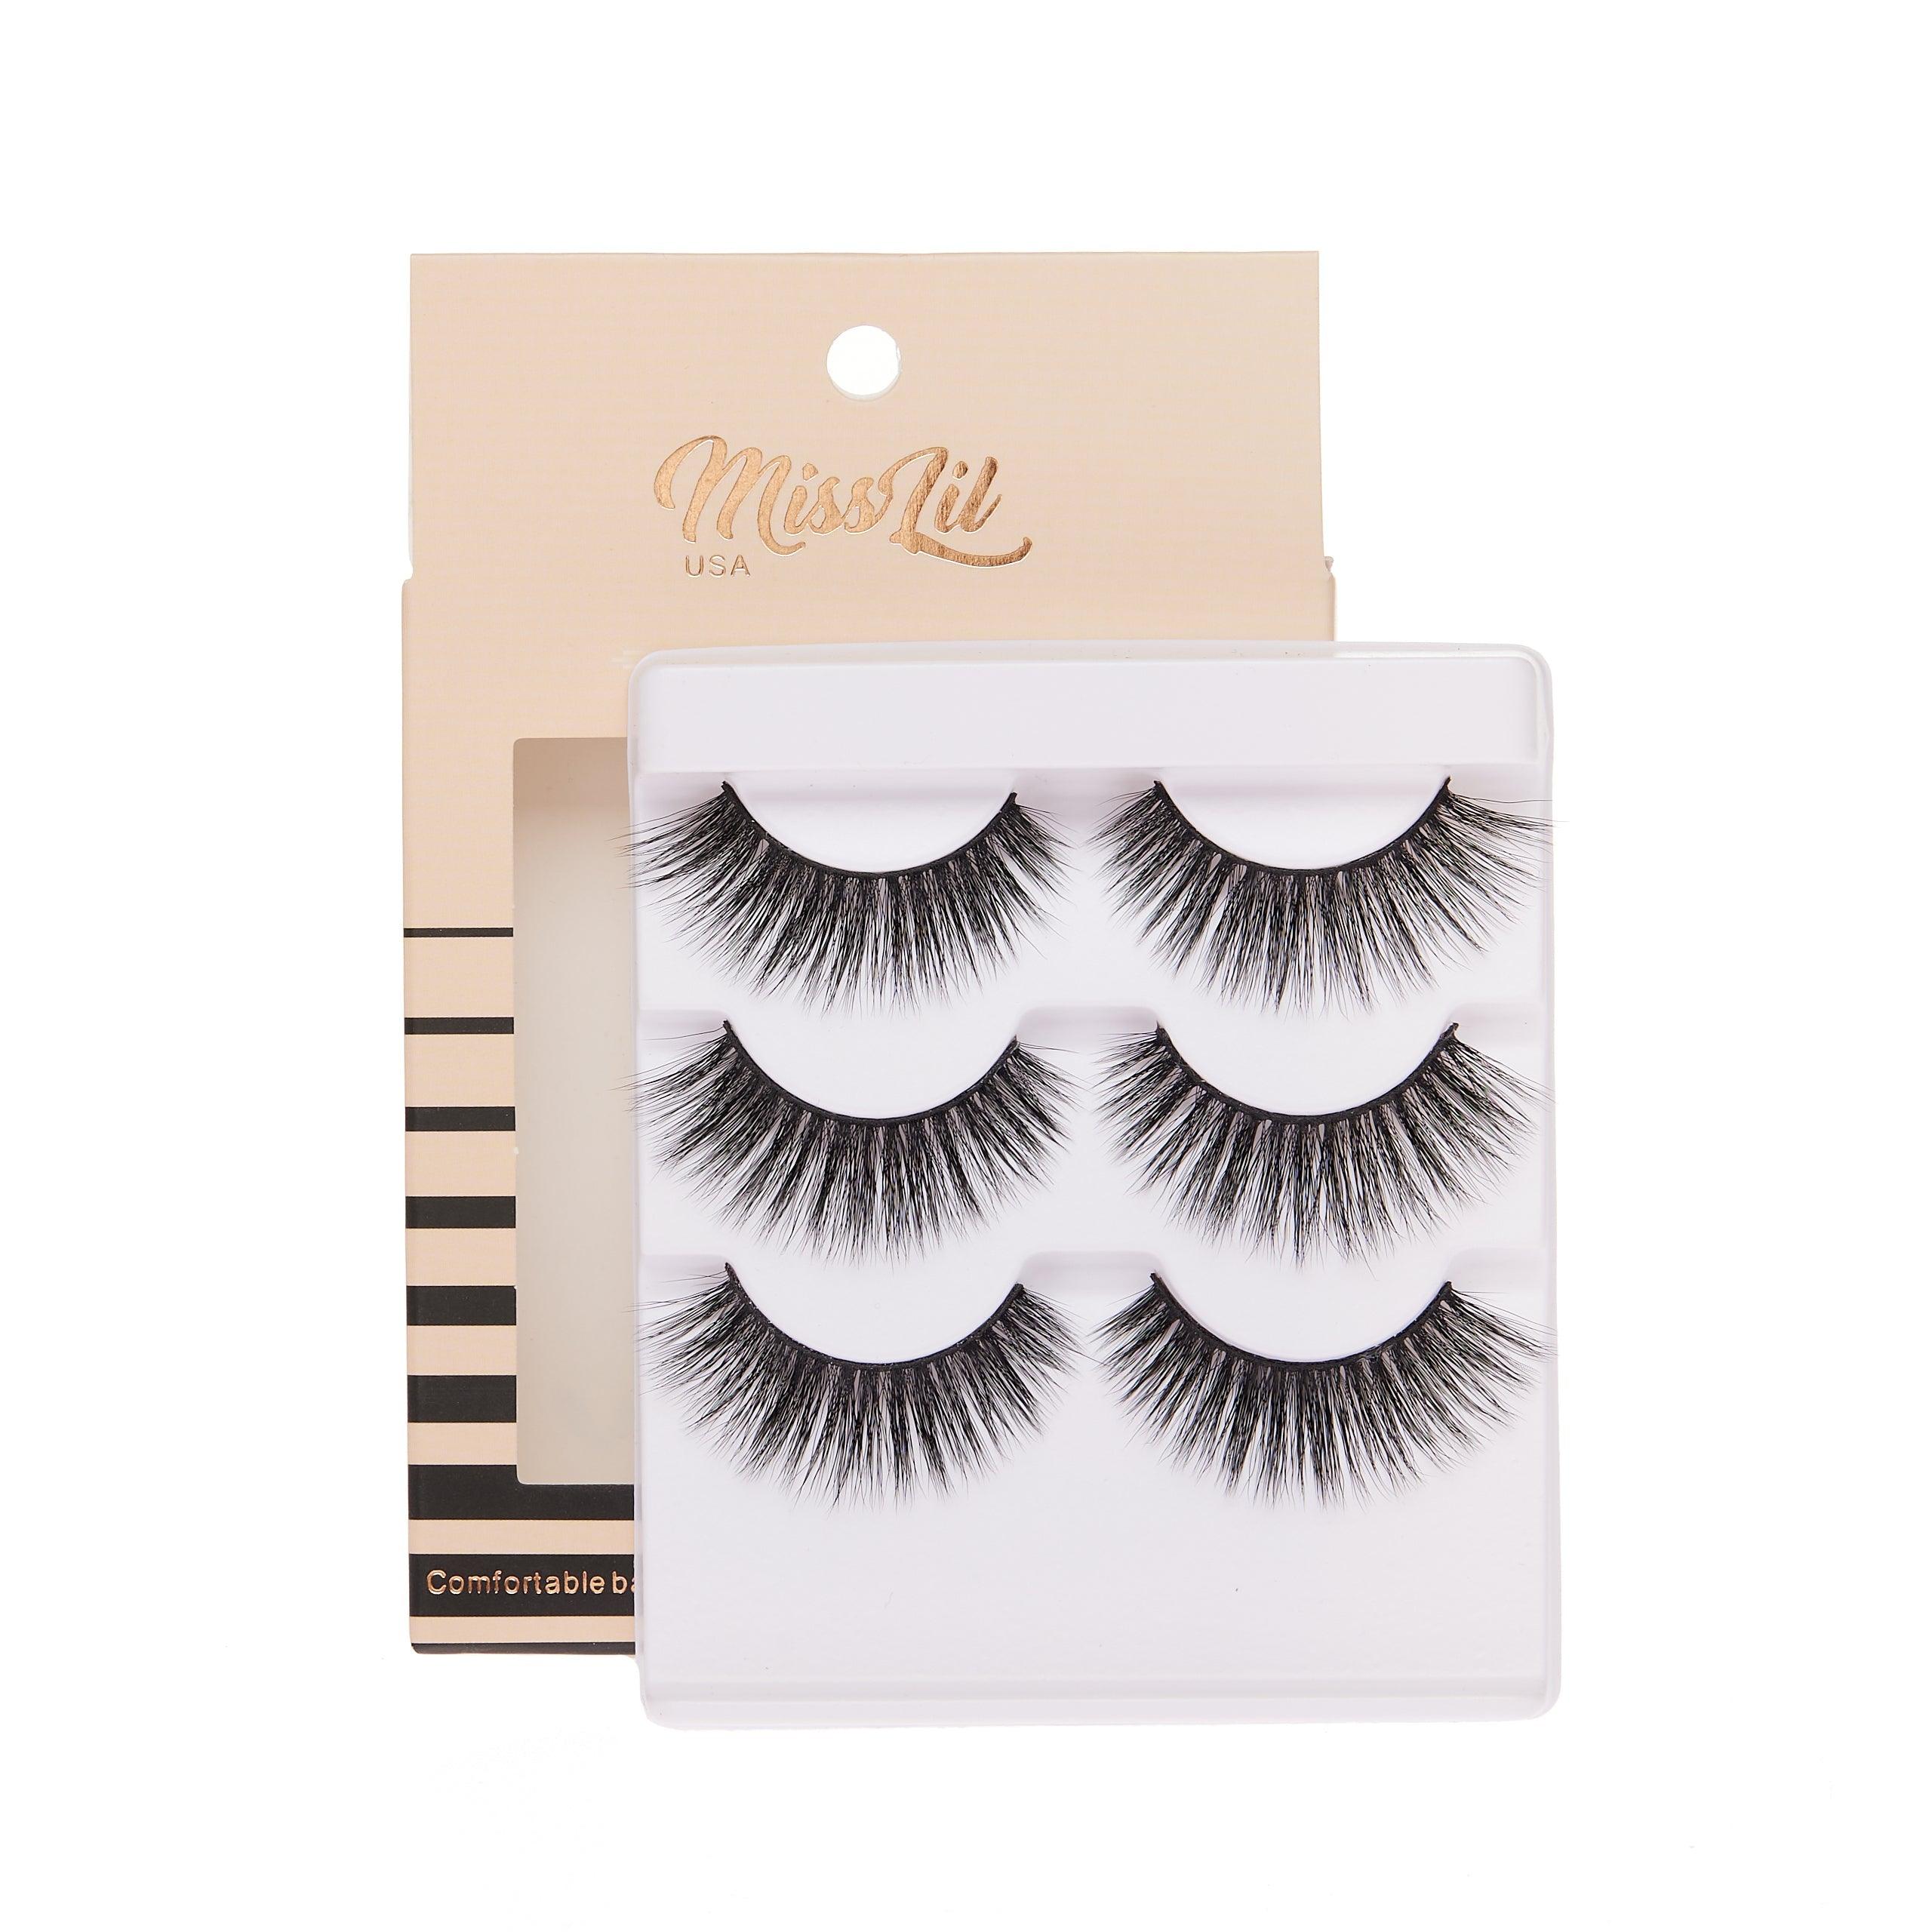 3-Pair Faux 9D Mink Eyelashes - Luxury Collection #21 - Pack of 12 - Miss Lil USA